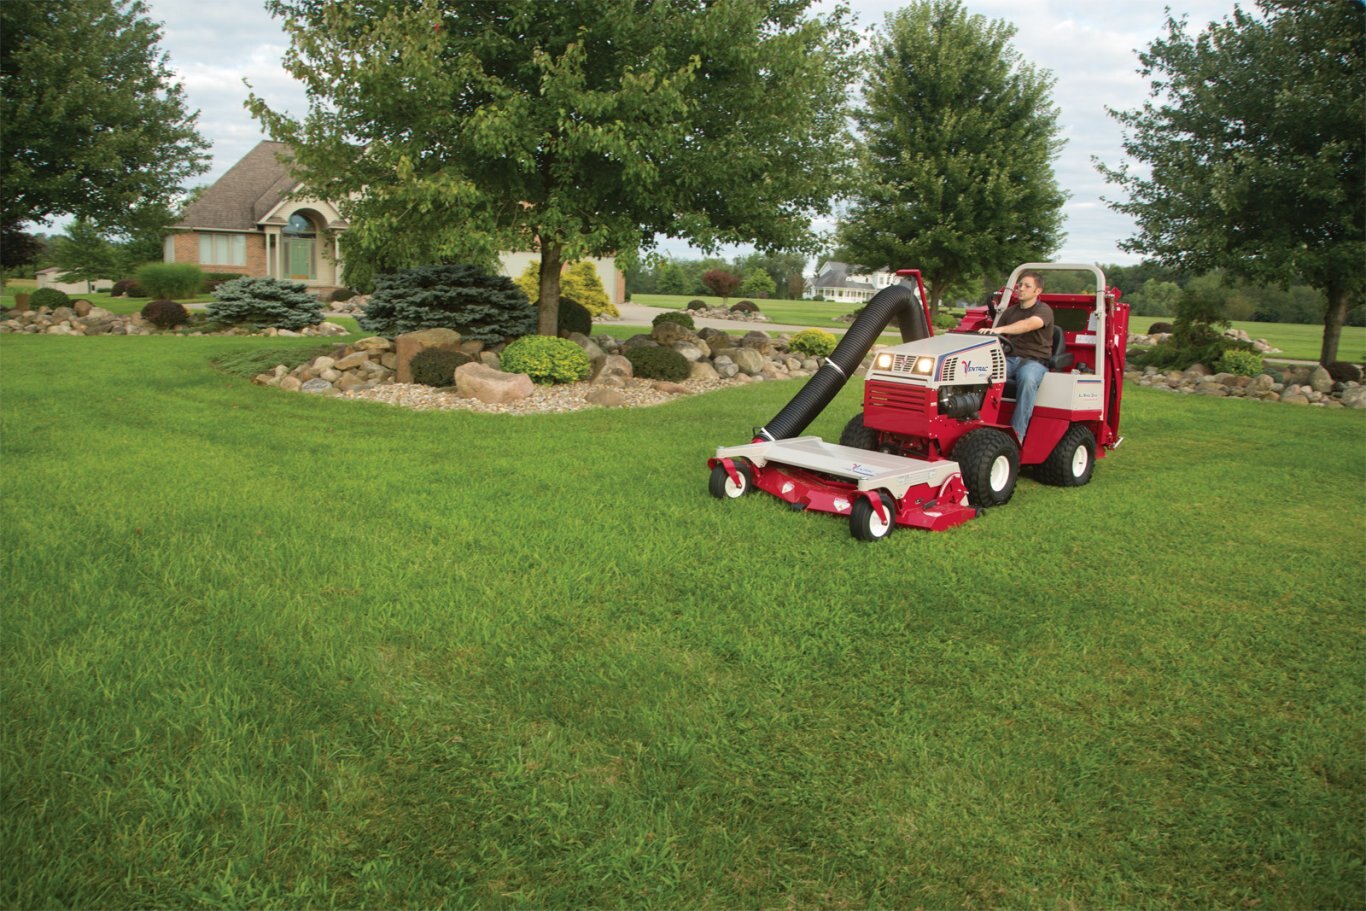 Ventrac RV602 Vacuum Collection System